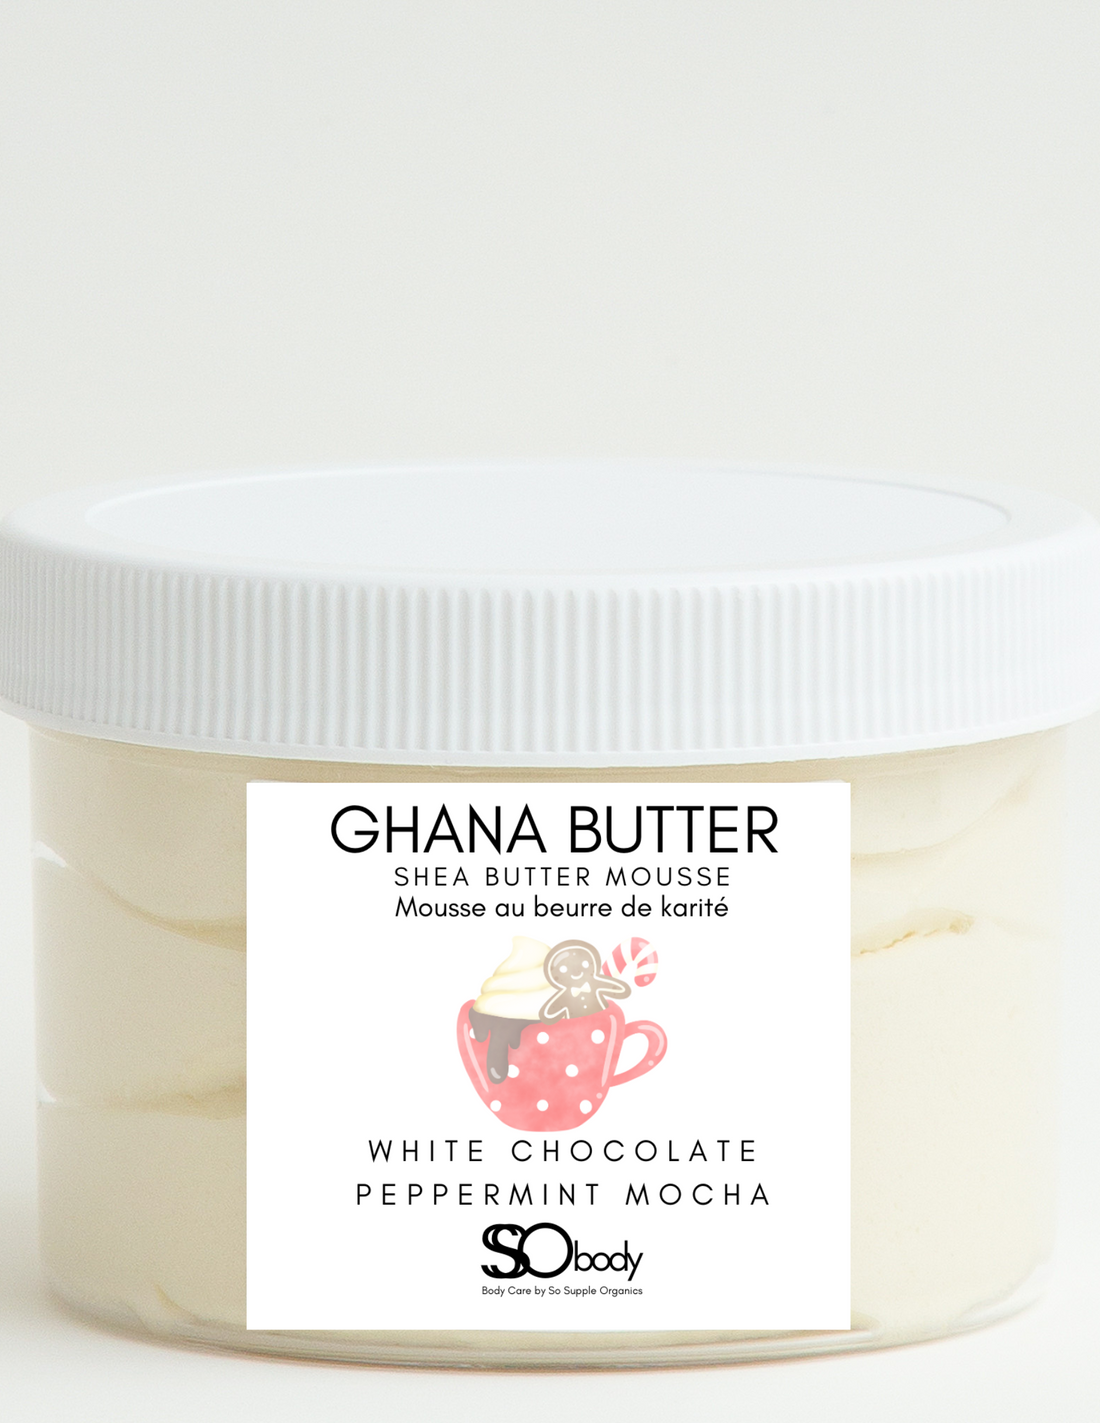 GHANA BUTTER Shea Butter Mousse- White Chocolate Peppermint Scent